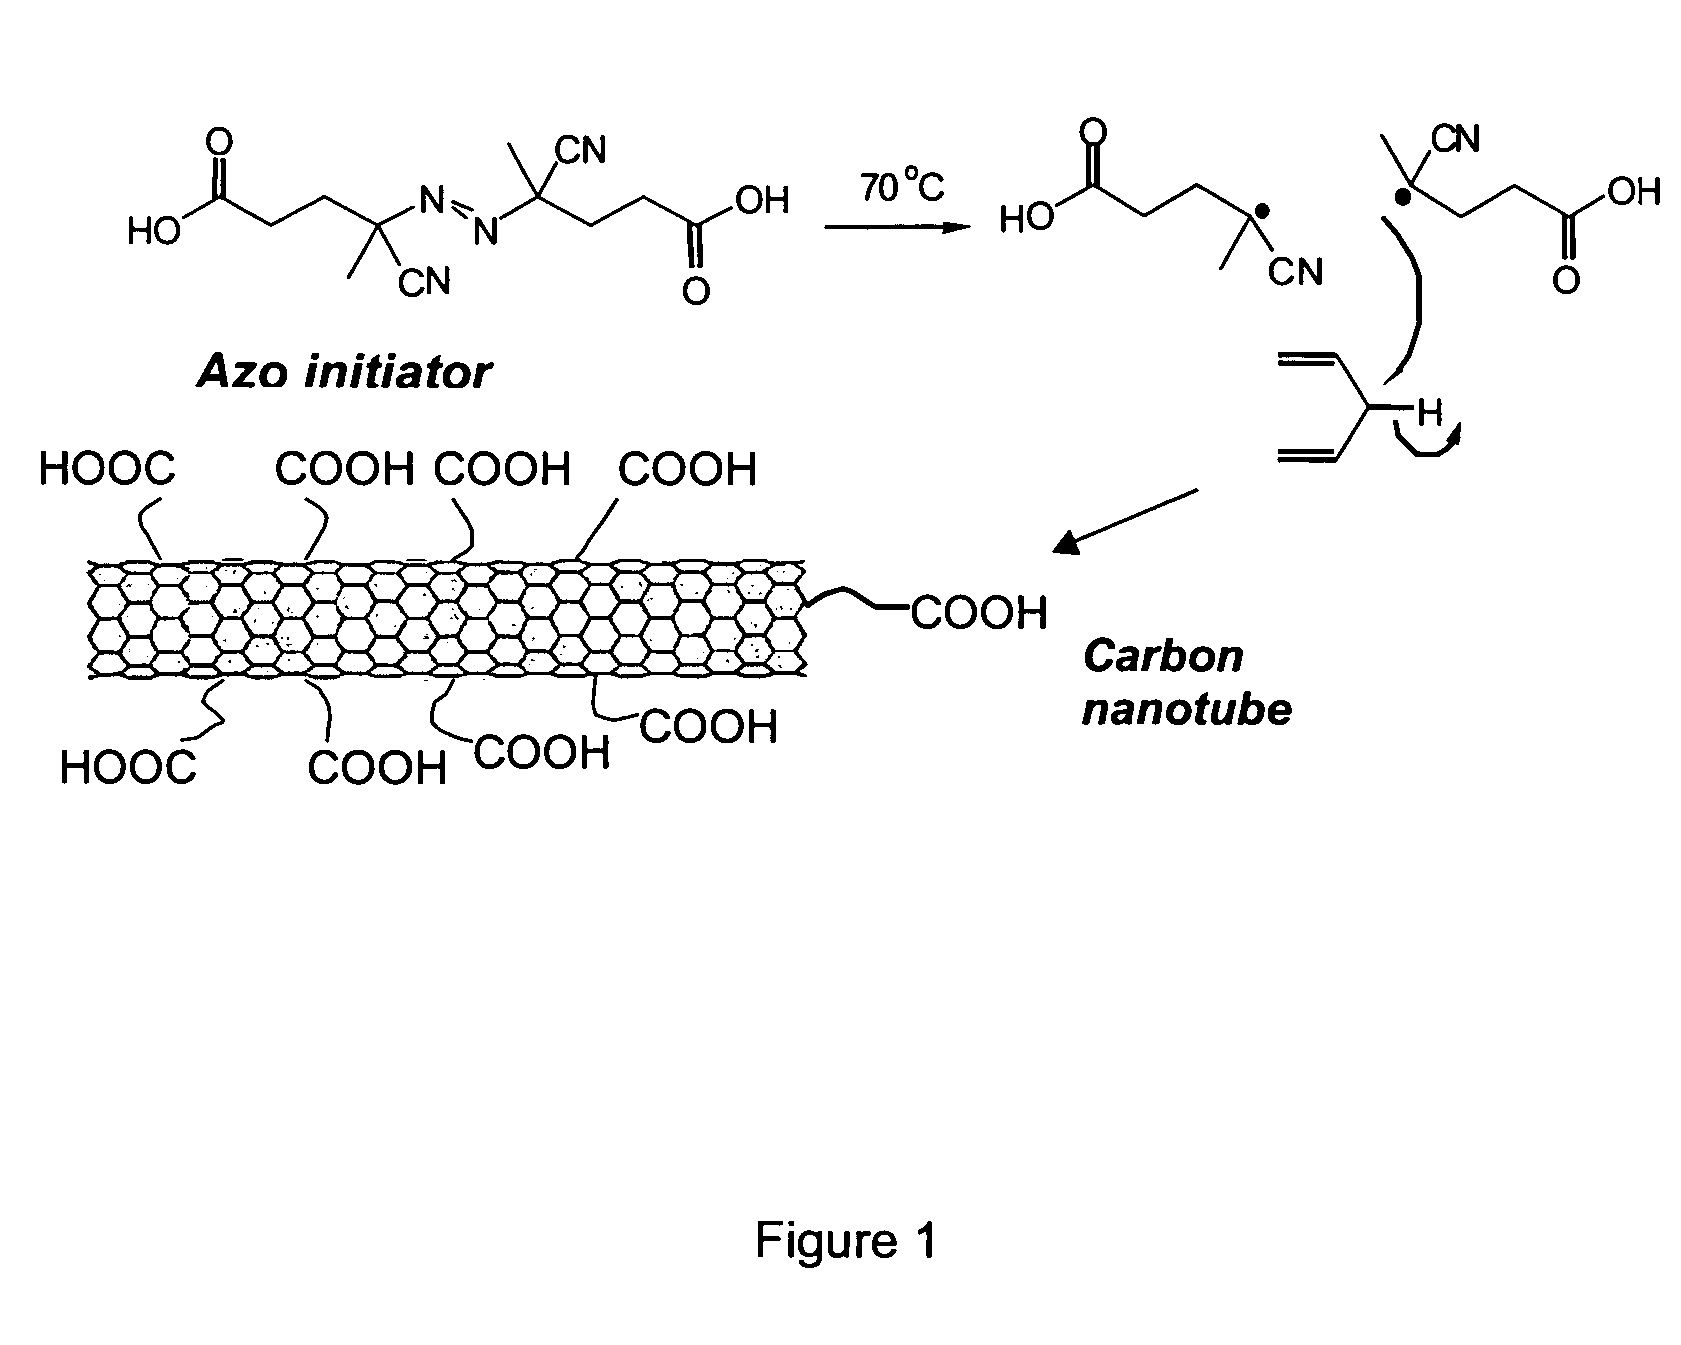 Hair coloring and cosmetic compositions comprising carbon nanotubes